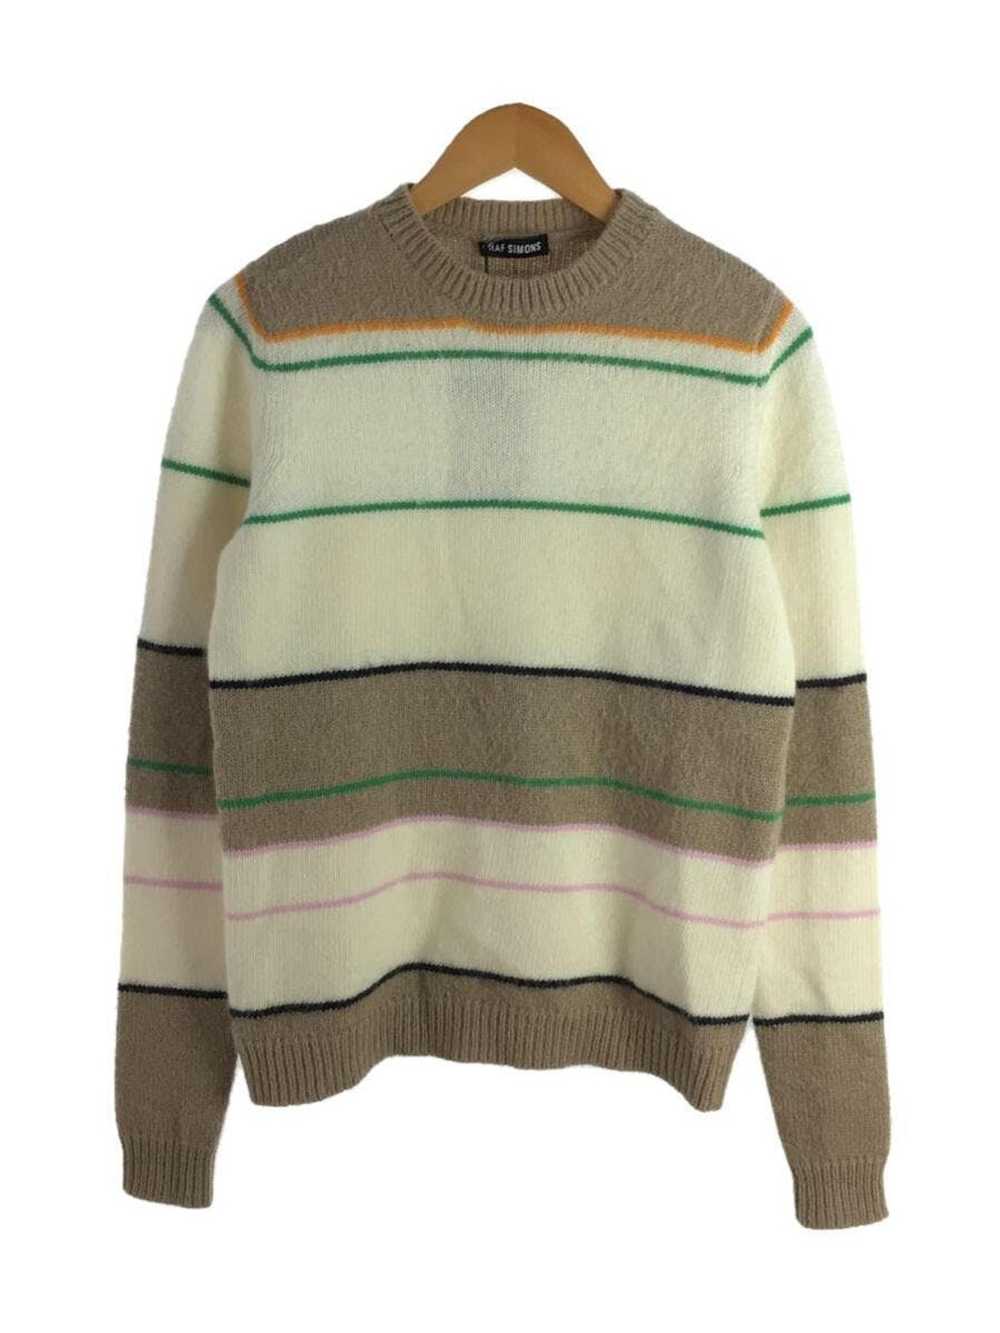 Acne Studios Mohair Wool Knit Sweater - image 1